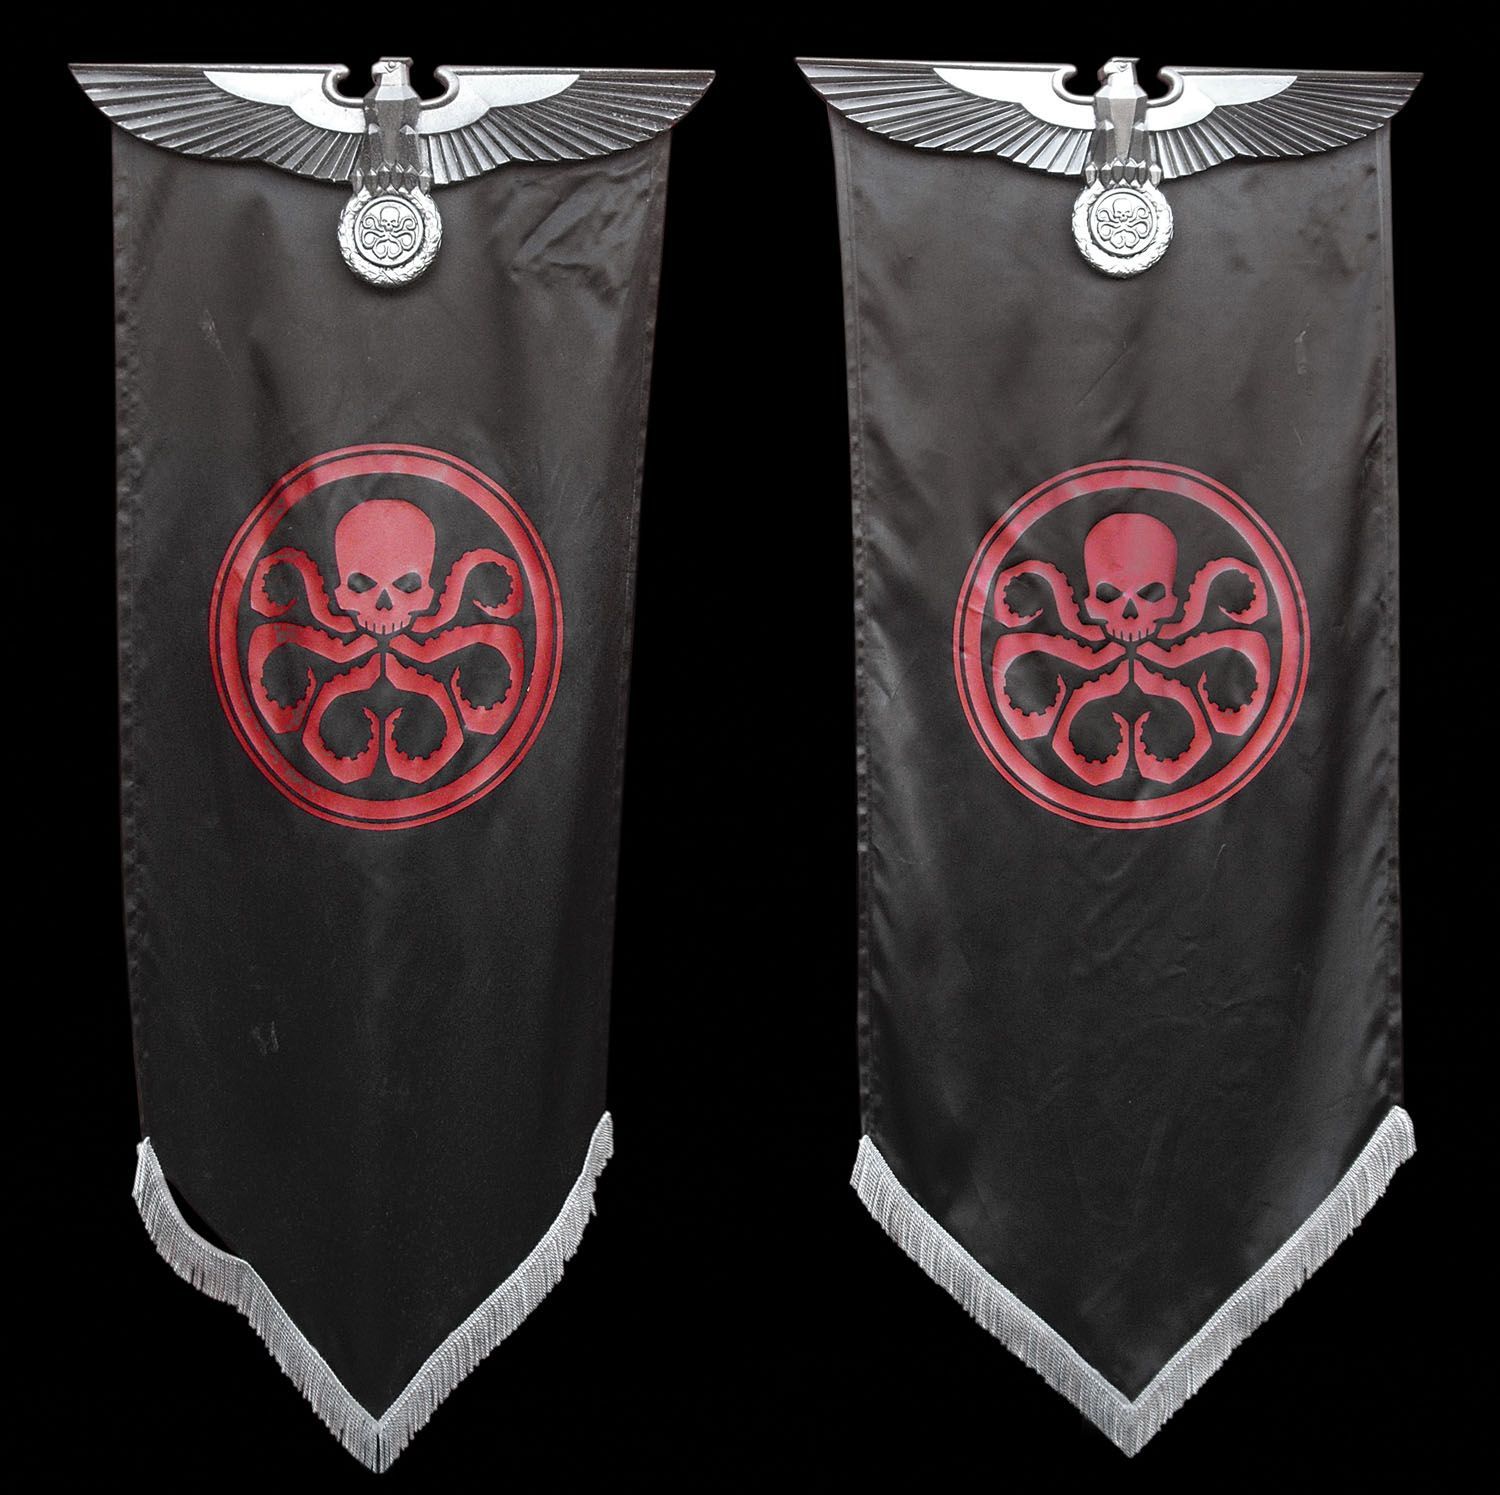 Pair of Hydra logo banners from Captain America The First Avenger. Captain america, Logo banners, Hydra